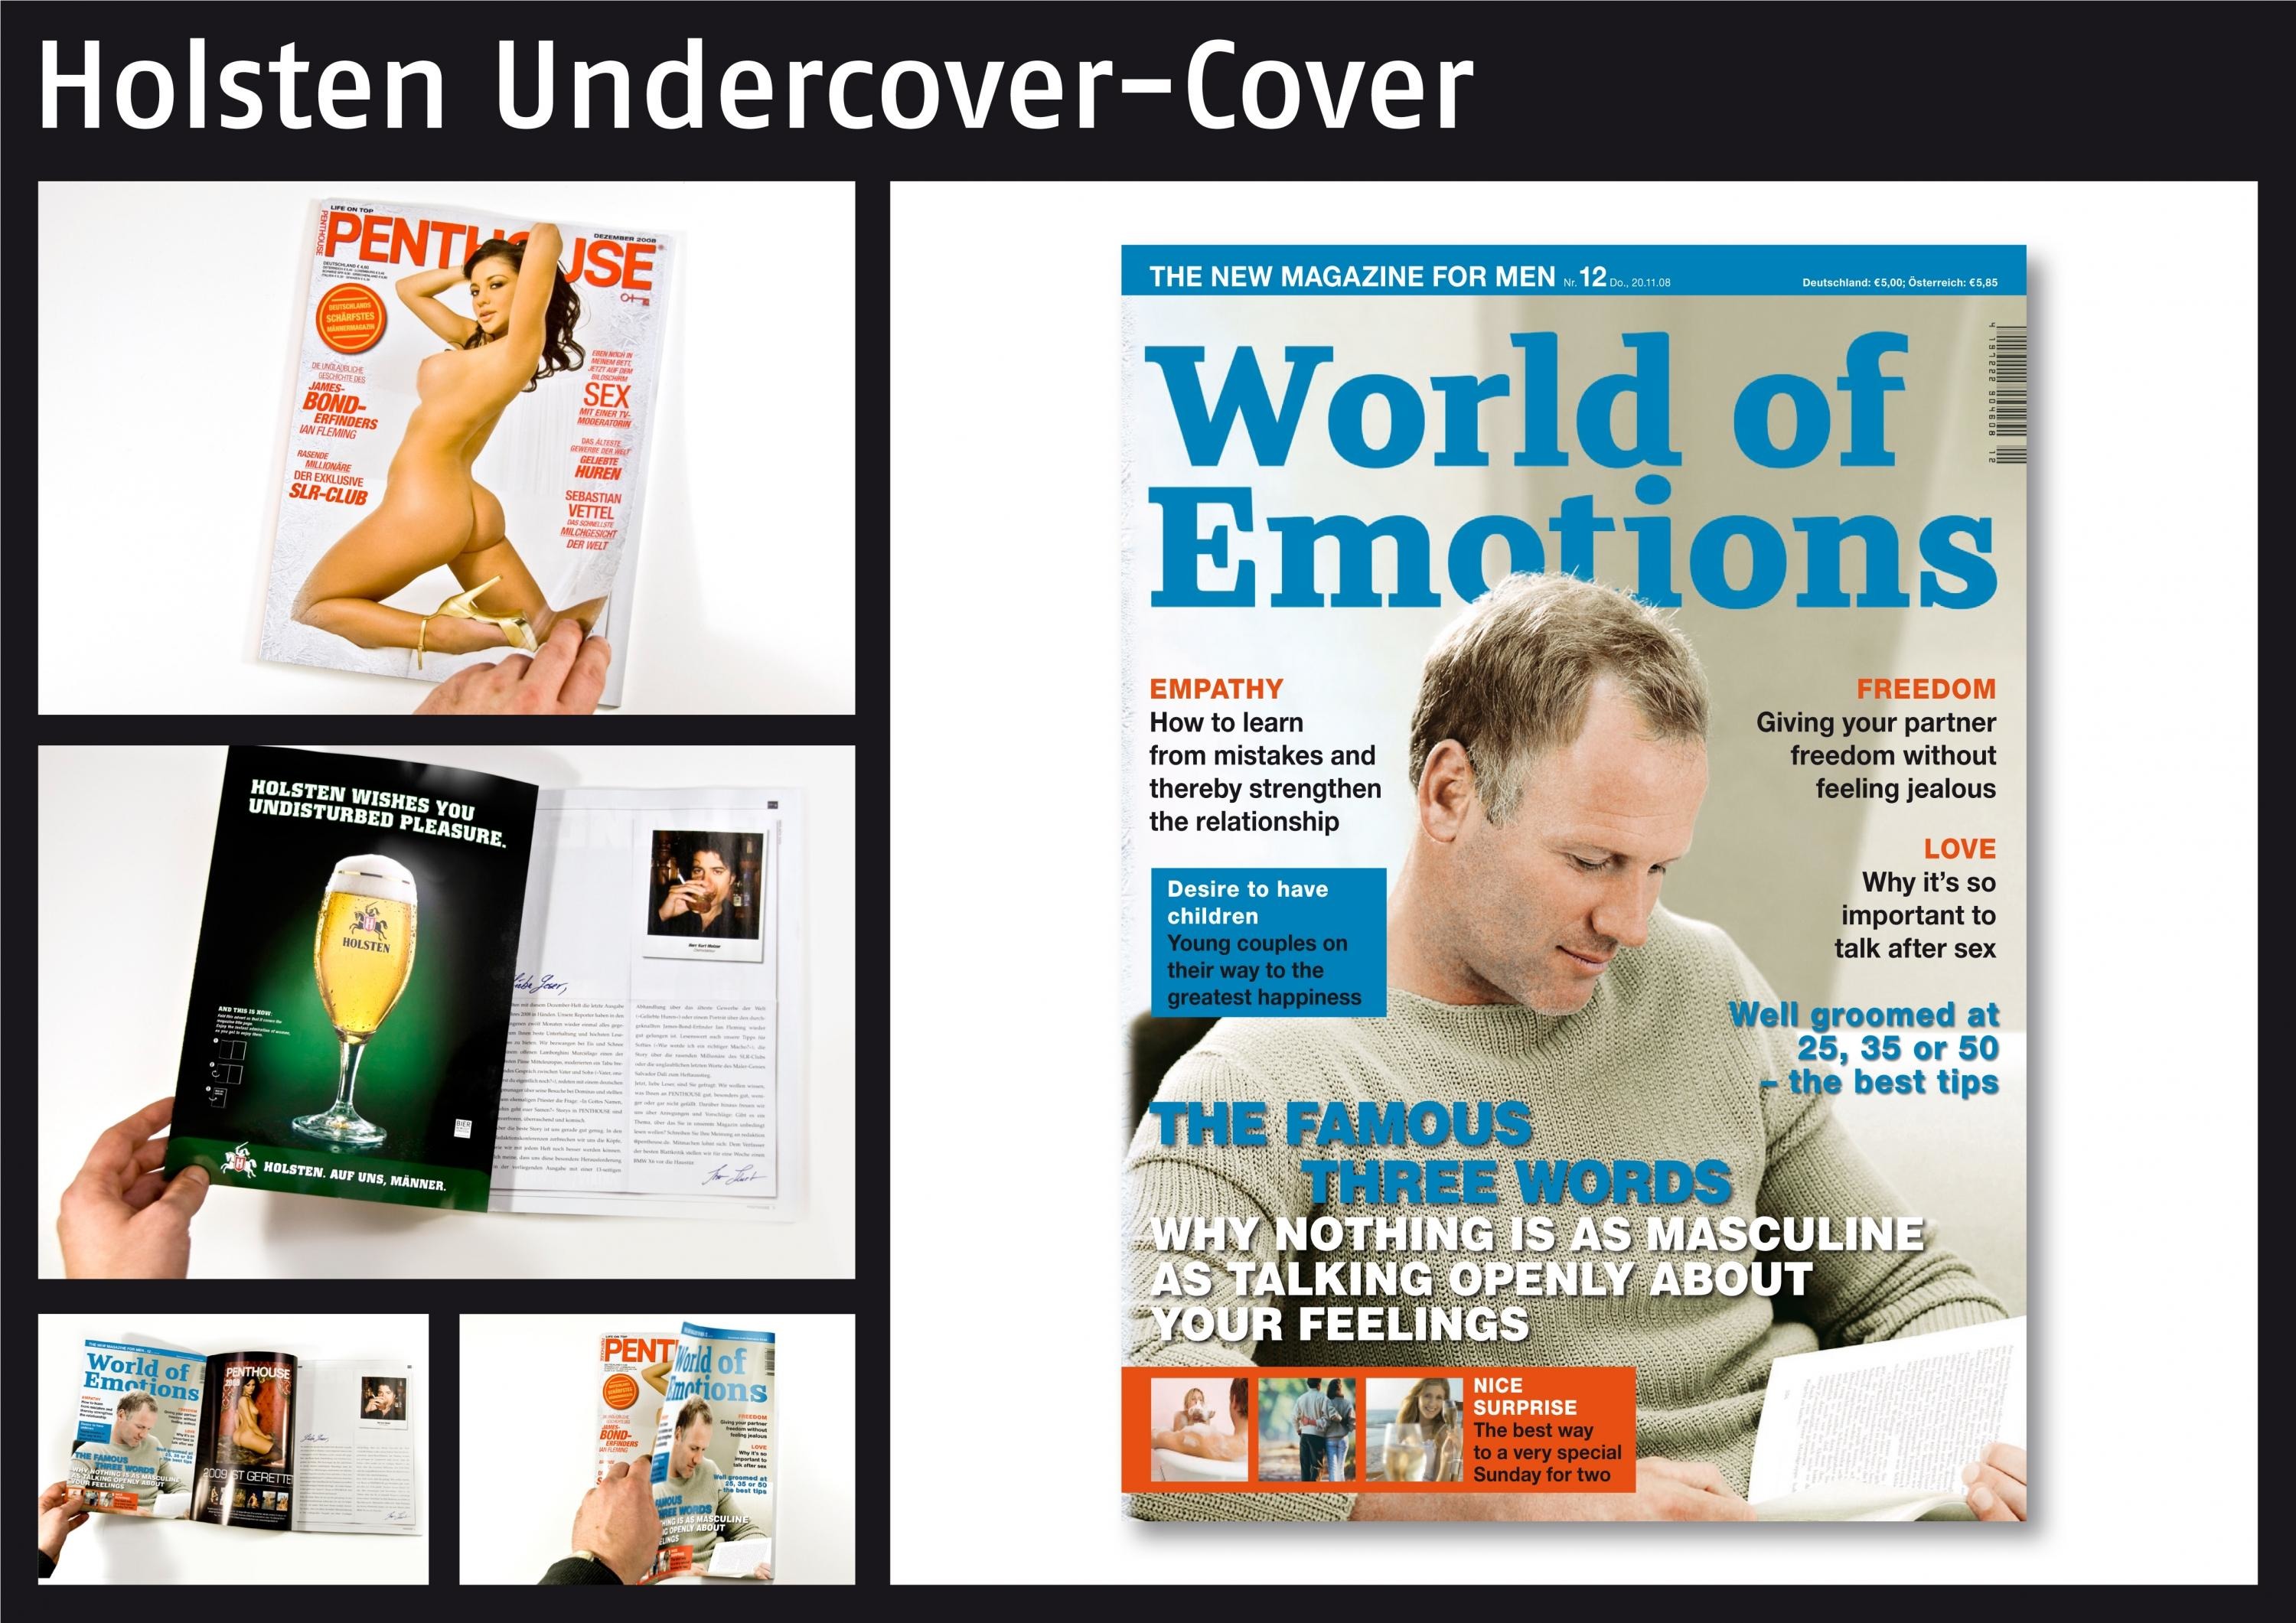 UNDERCOVER COVER